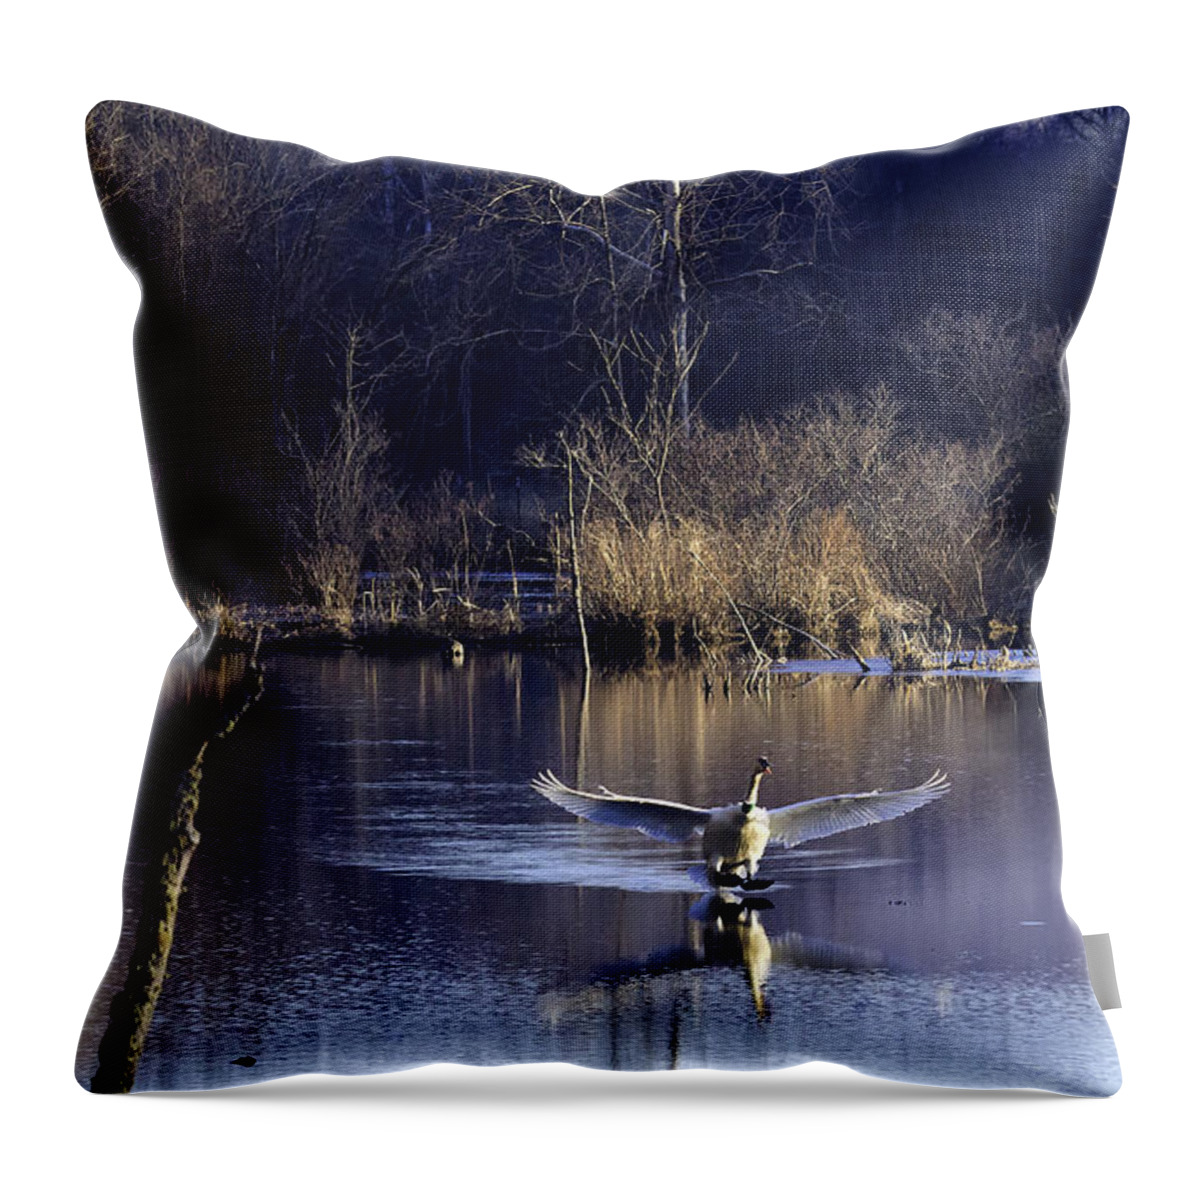 Trumpeter Swan Throw Pillow featuring the photograph Touchdown Trumpeter Swan by Michael Dougherty